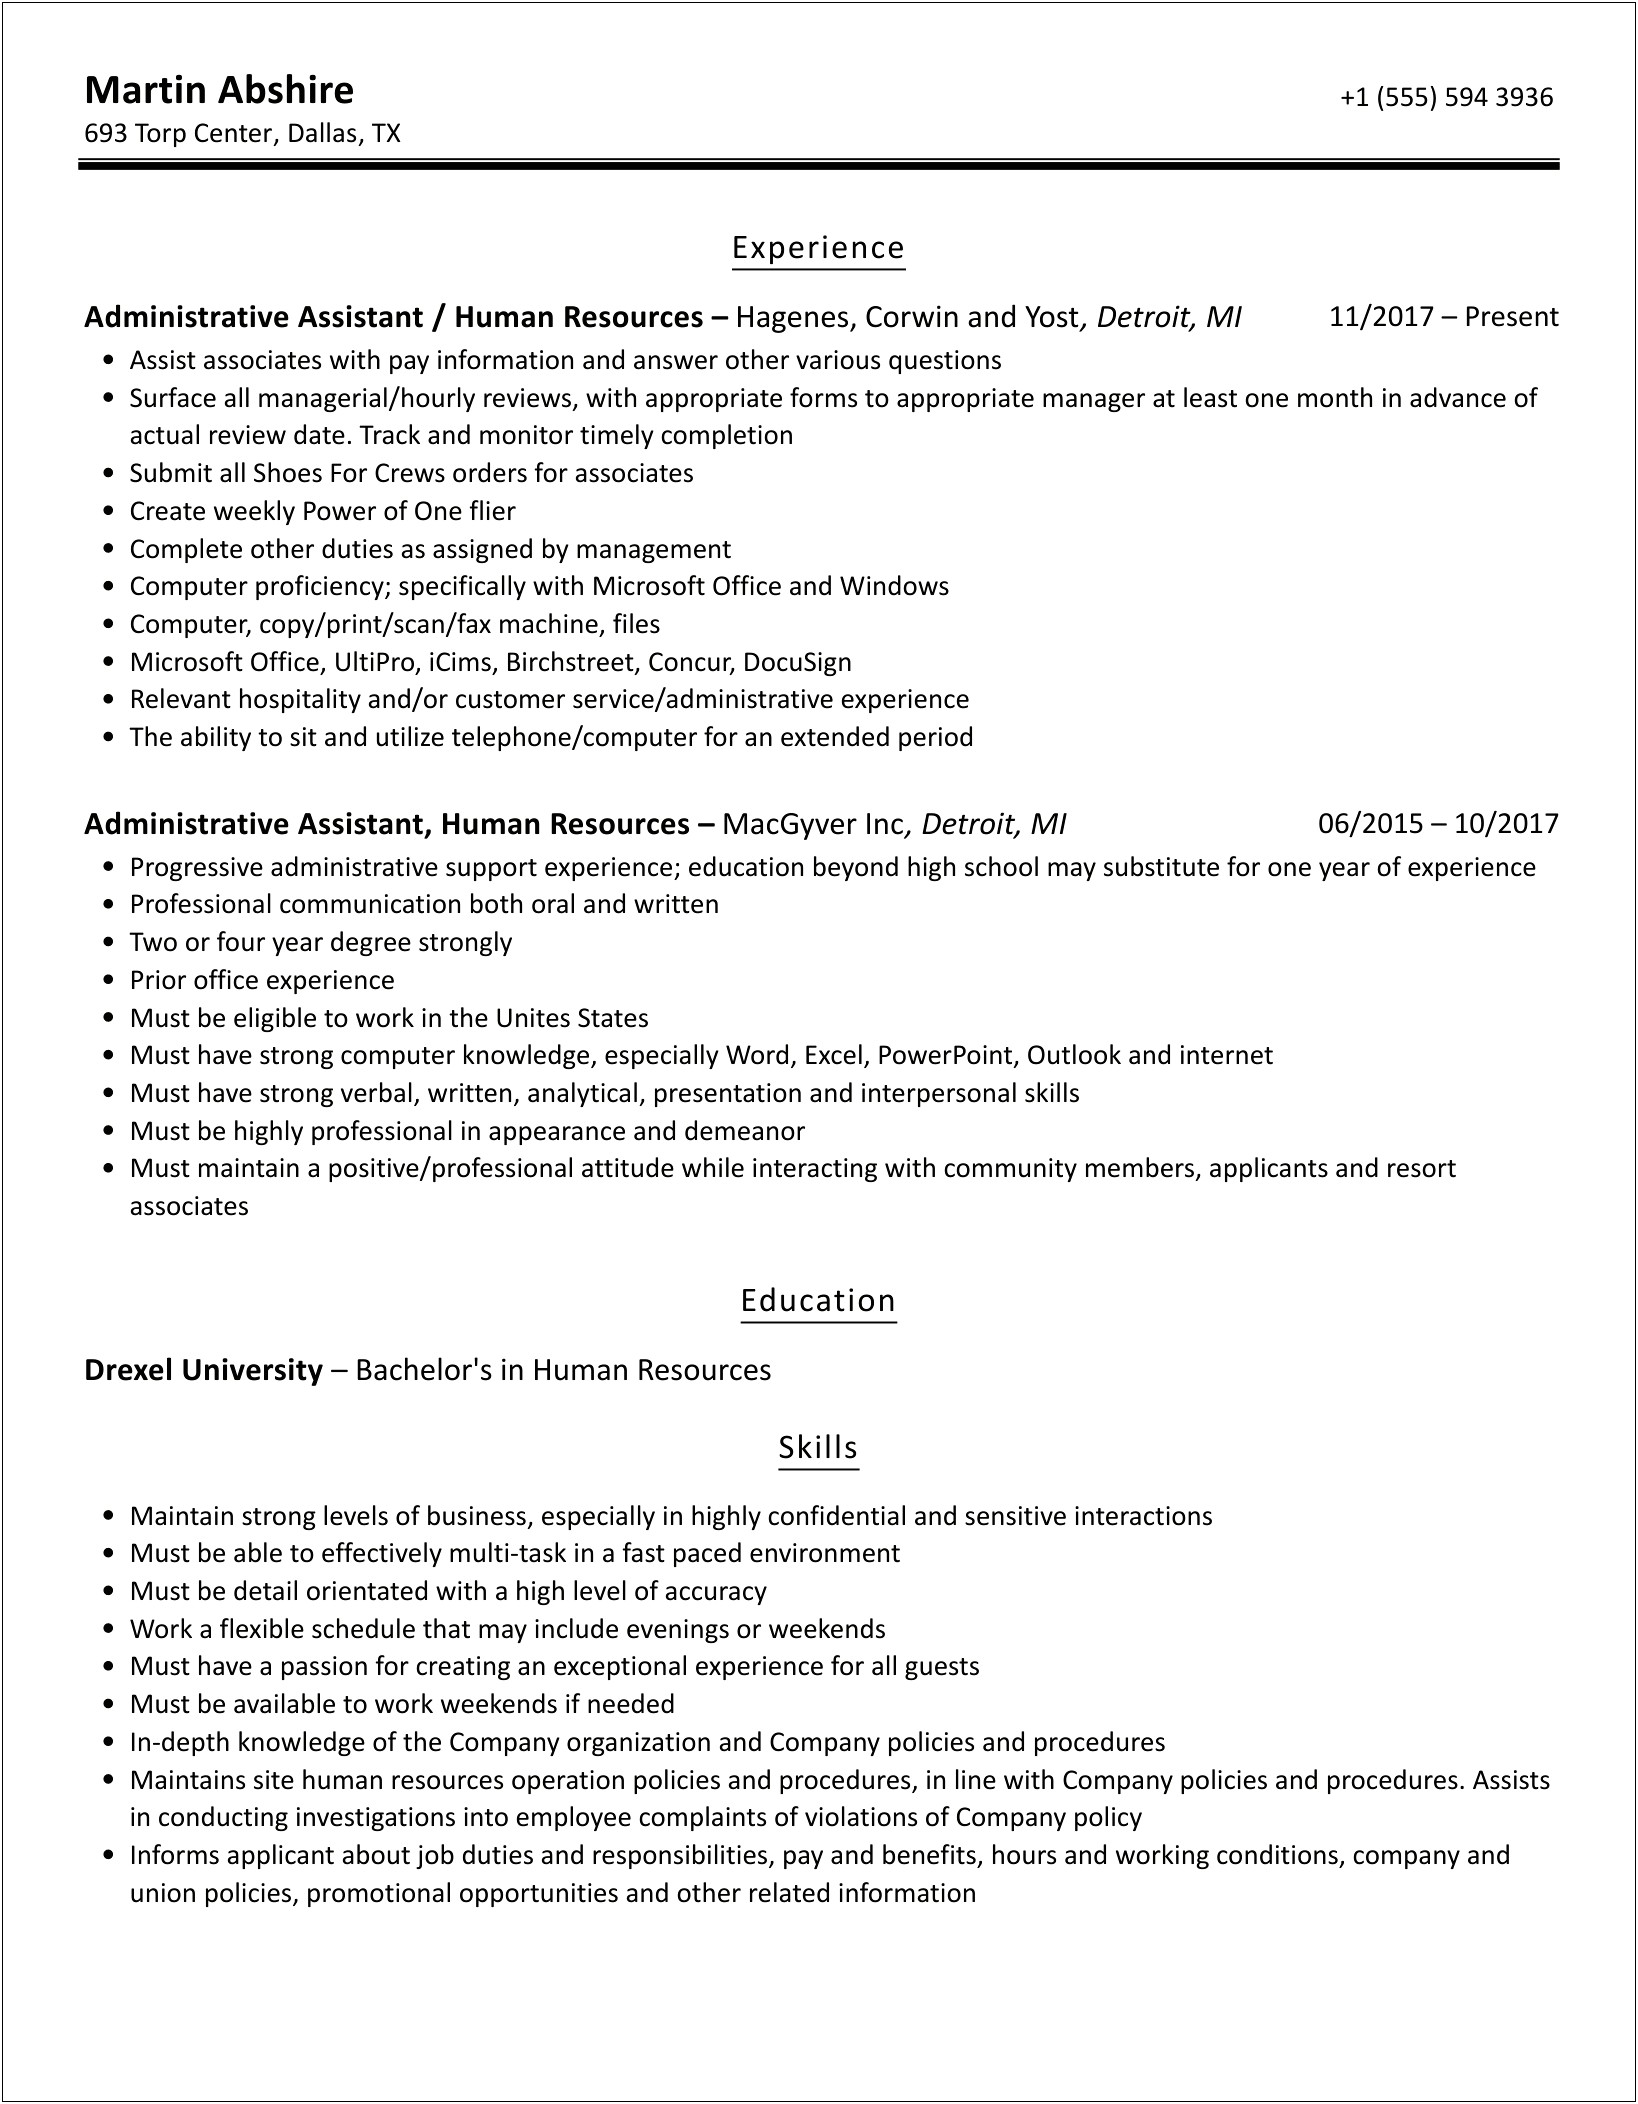 Human Resources Administrative Assistant Sample Resume